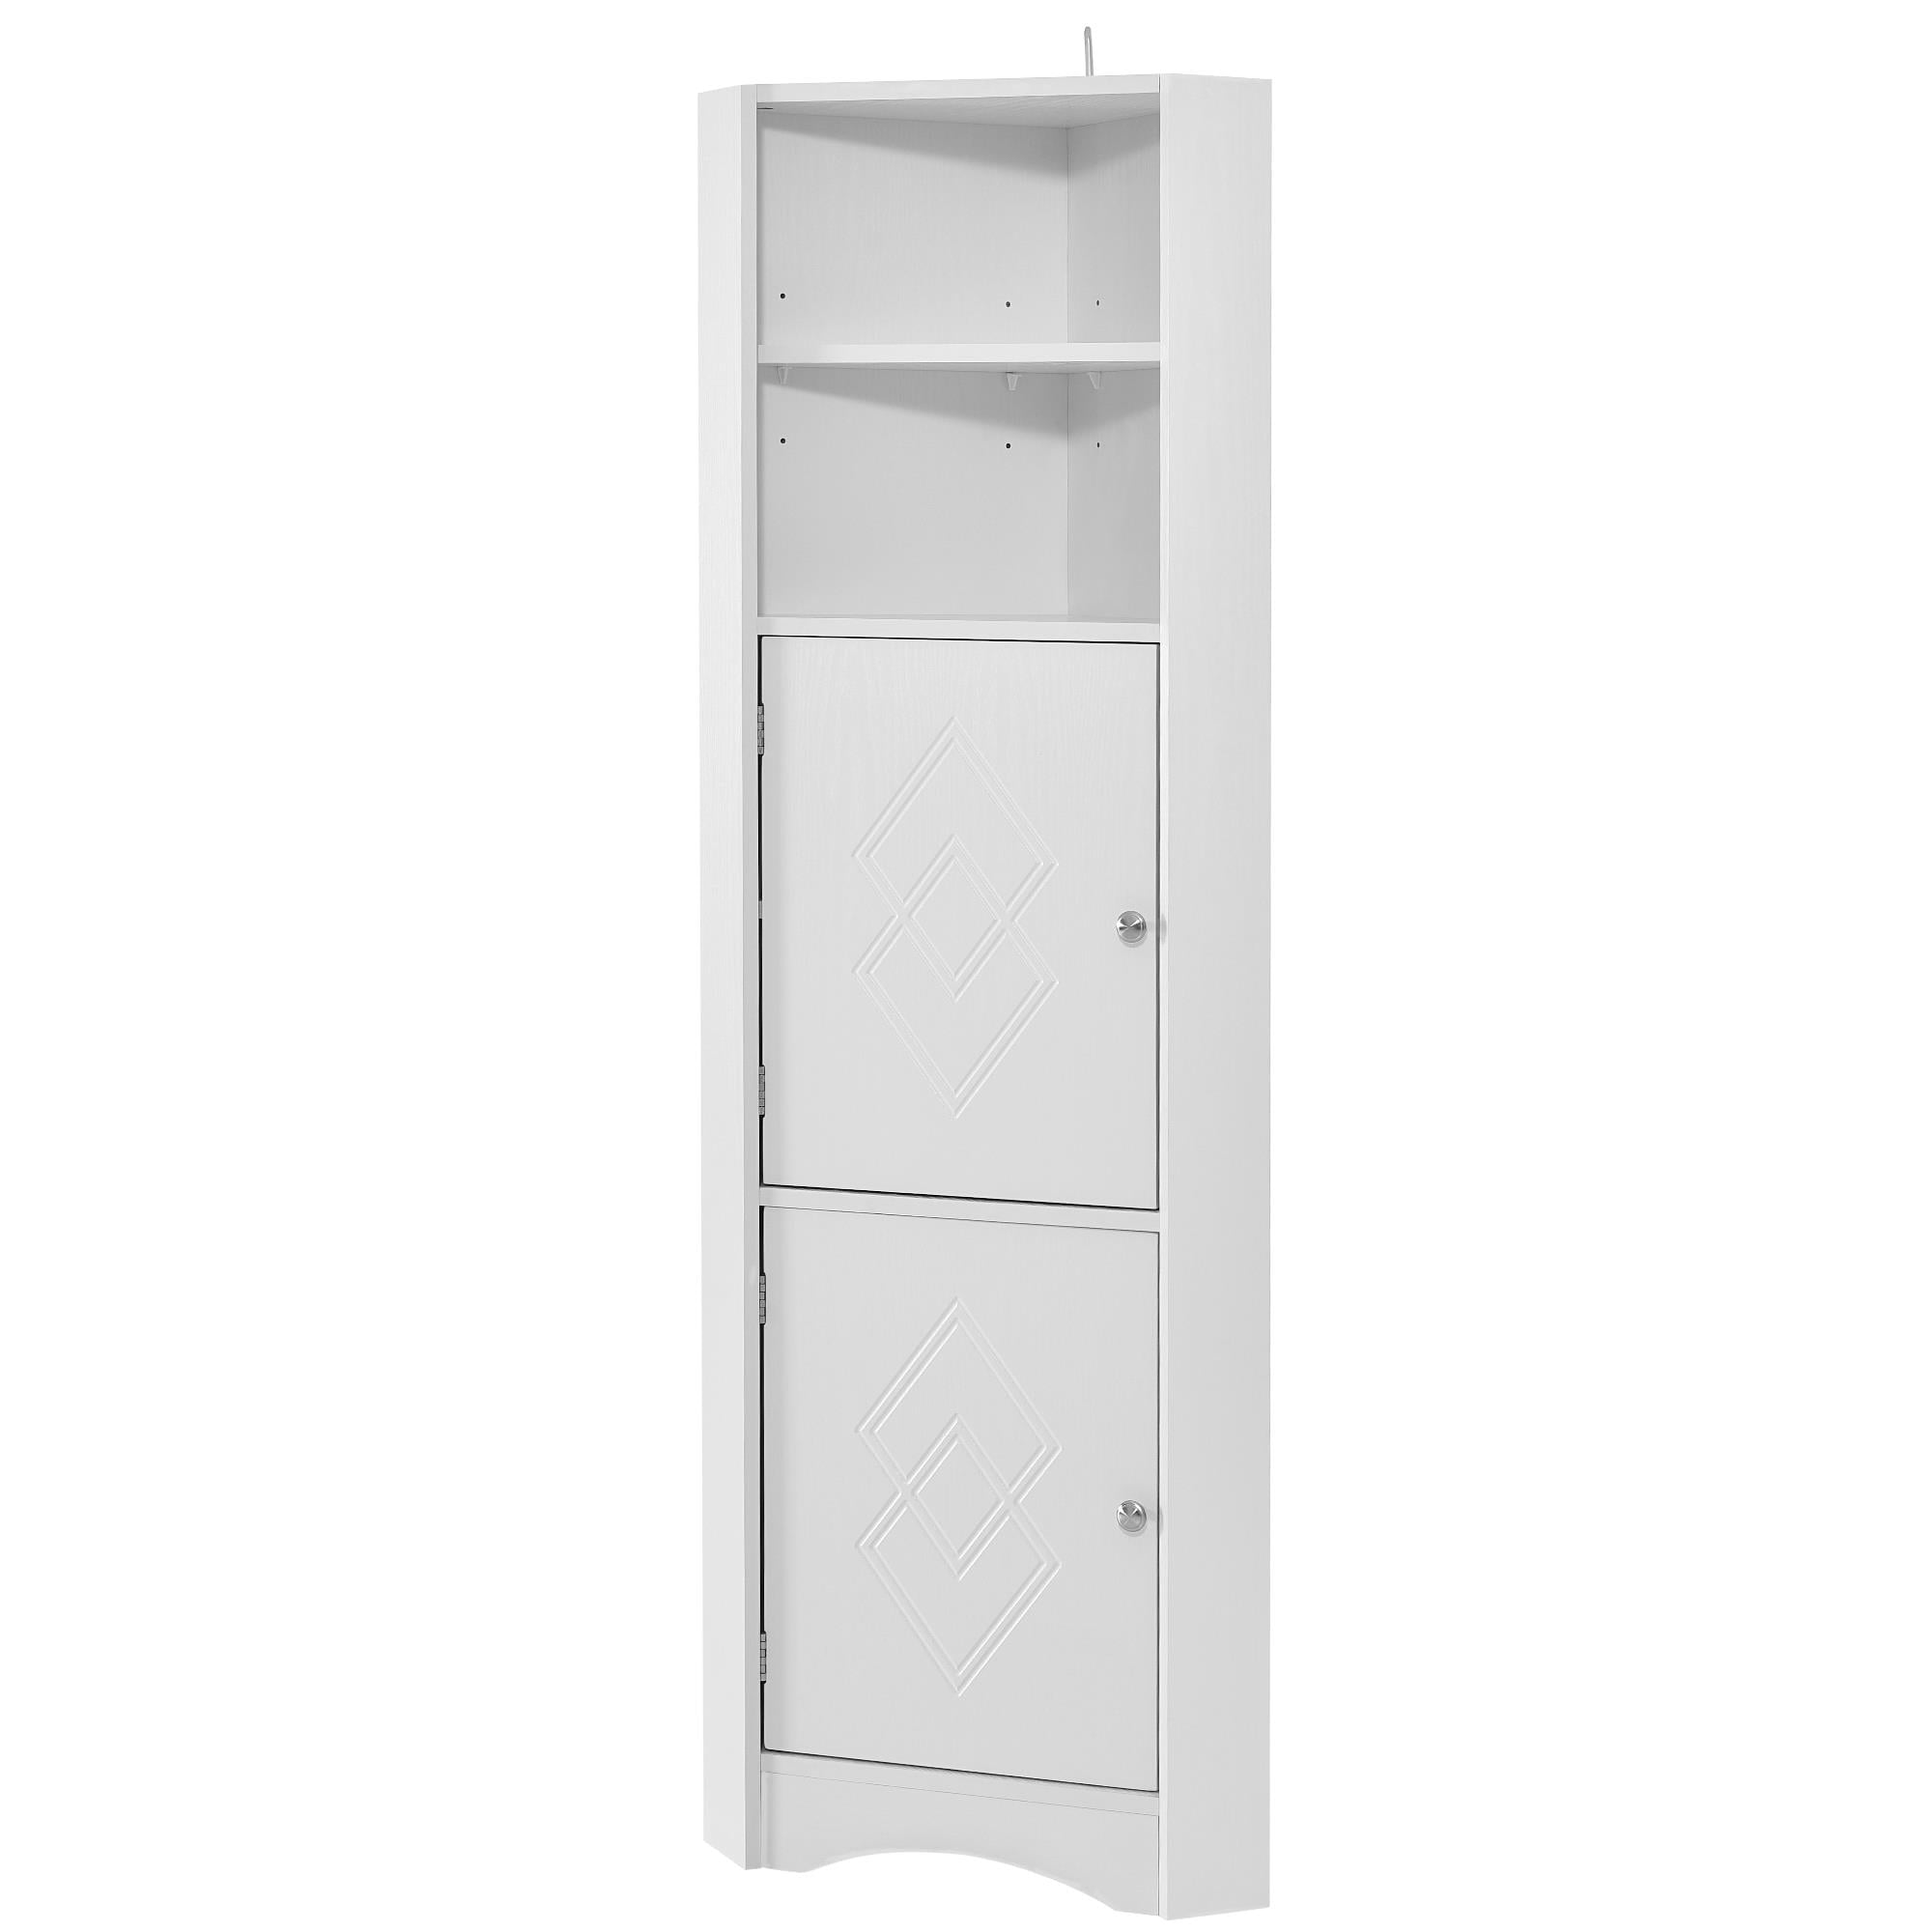 Dropship White Bathroom Storage Cabinet With Shelf Narrow Corner Organizer  Floor Standing (H63 6 Shelves 2 Door) to Sell Online at a Lower Price